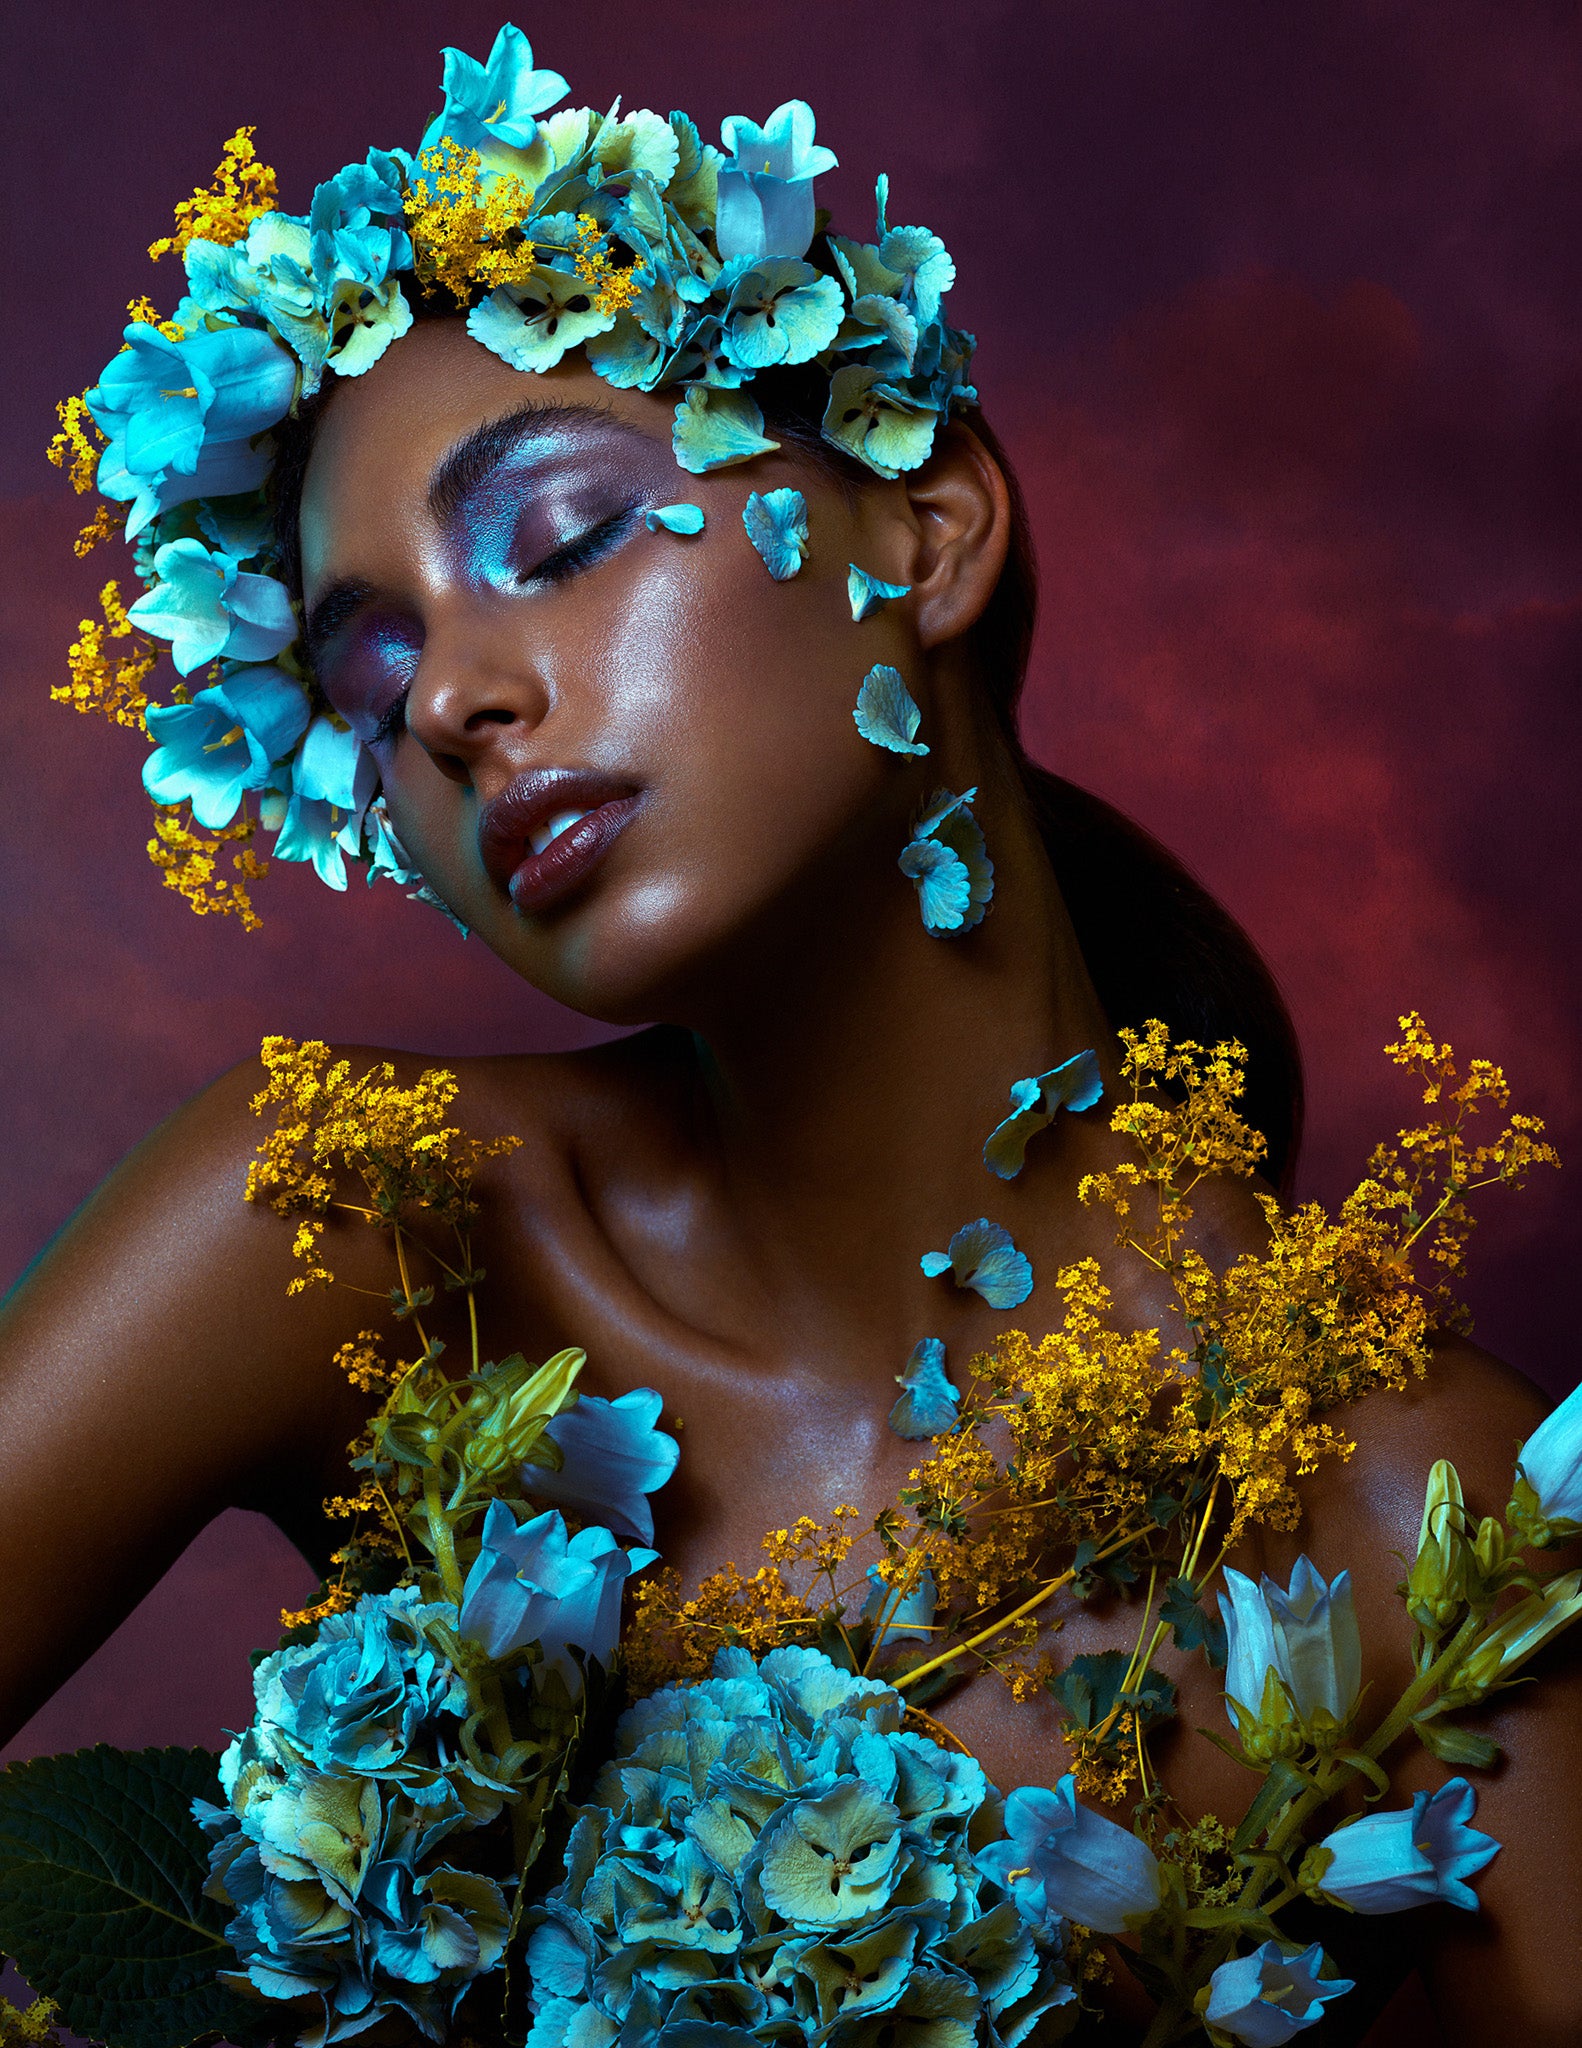 Bella Kotak photography, floral beauty portrait of a dark skinned young woman with beautiful makeup and lighting